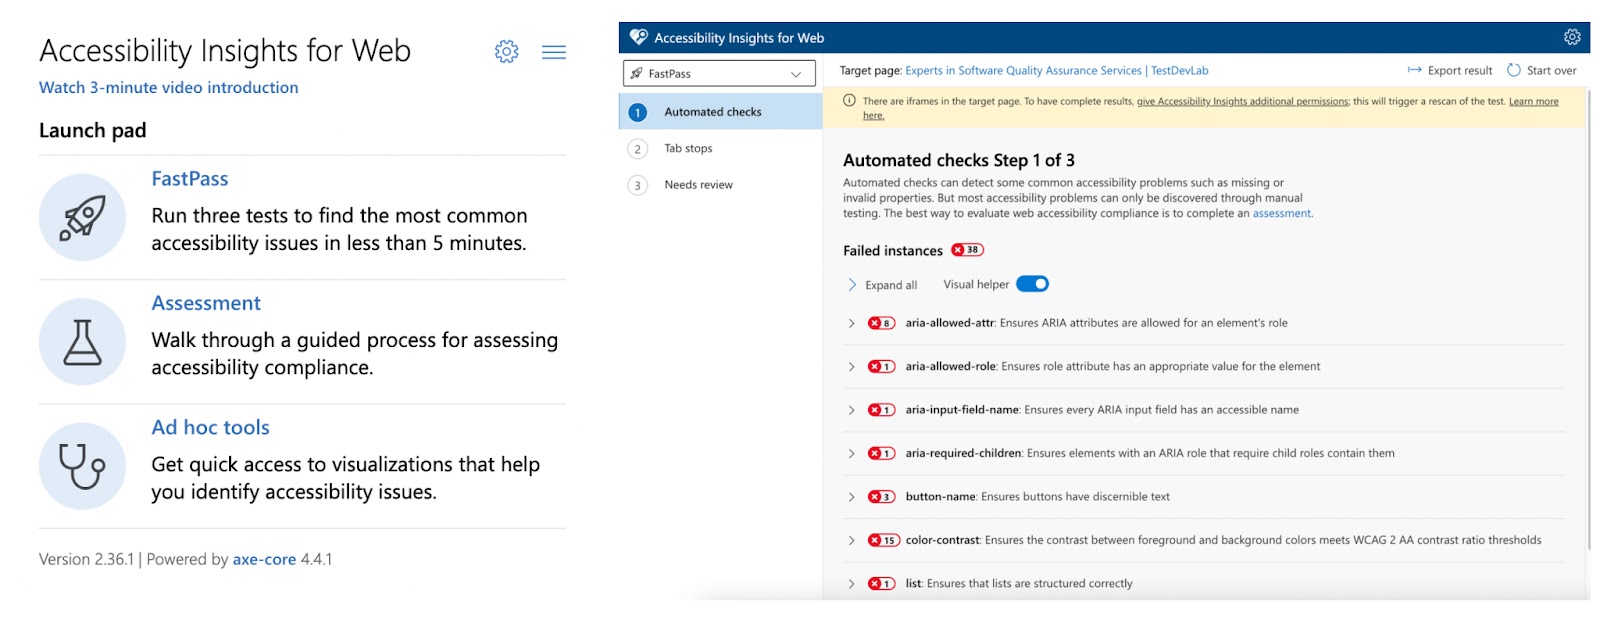 Screenshots from Accessibility Insights for Web